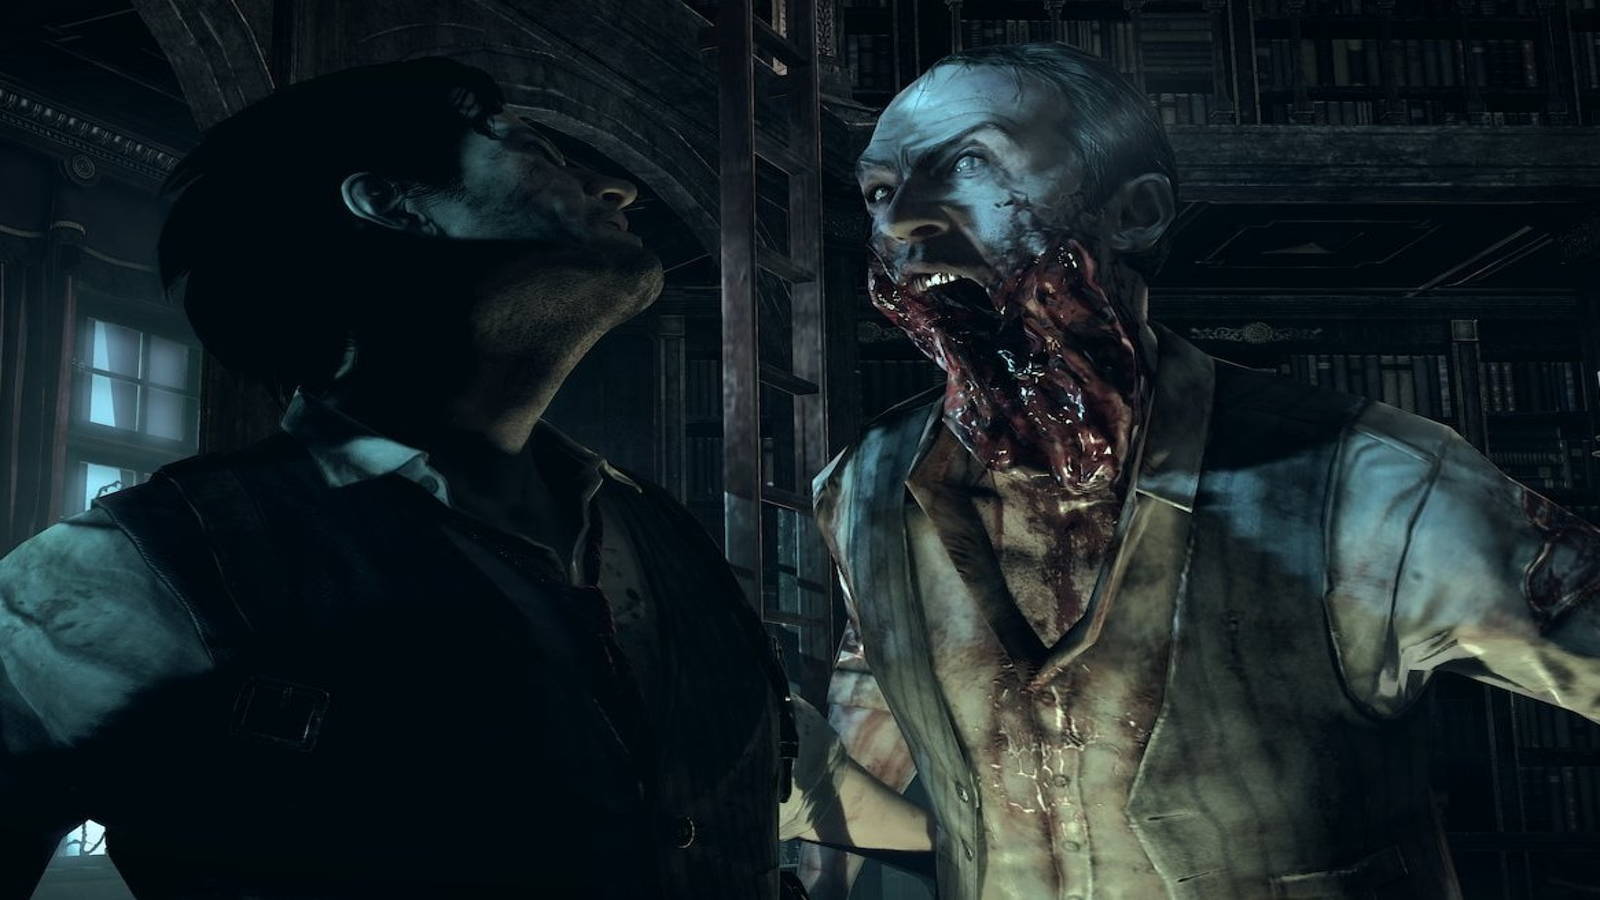 Resident Evil 2' Review: A Deliciously Fresh Zombie Bite Into